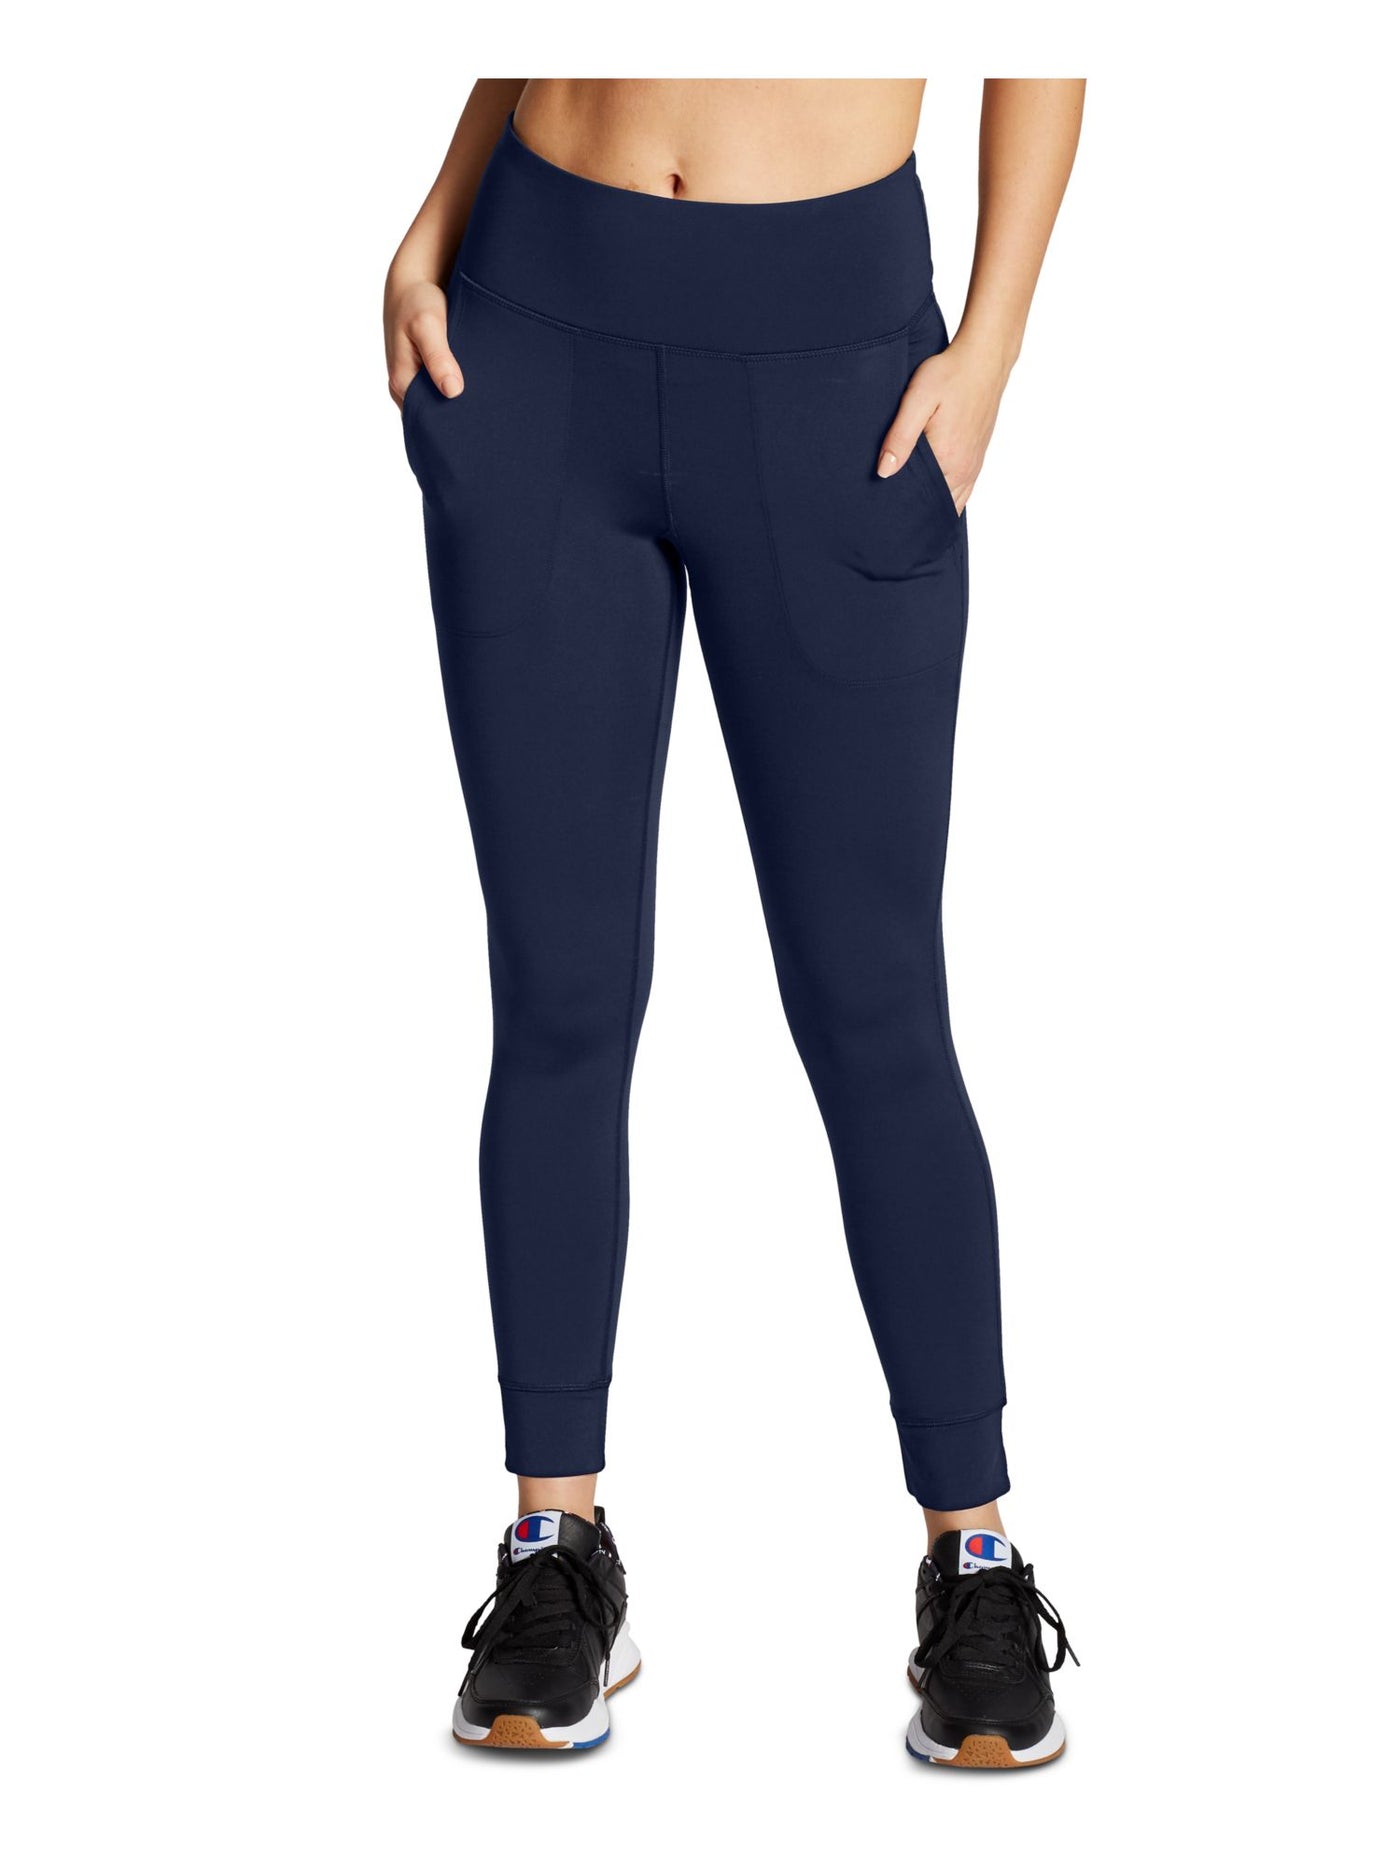 CHAMPION Womens Stretch Moisture Wicking Pocketed Full Length Active Wear Skinny Leggings